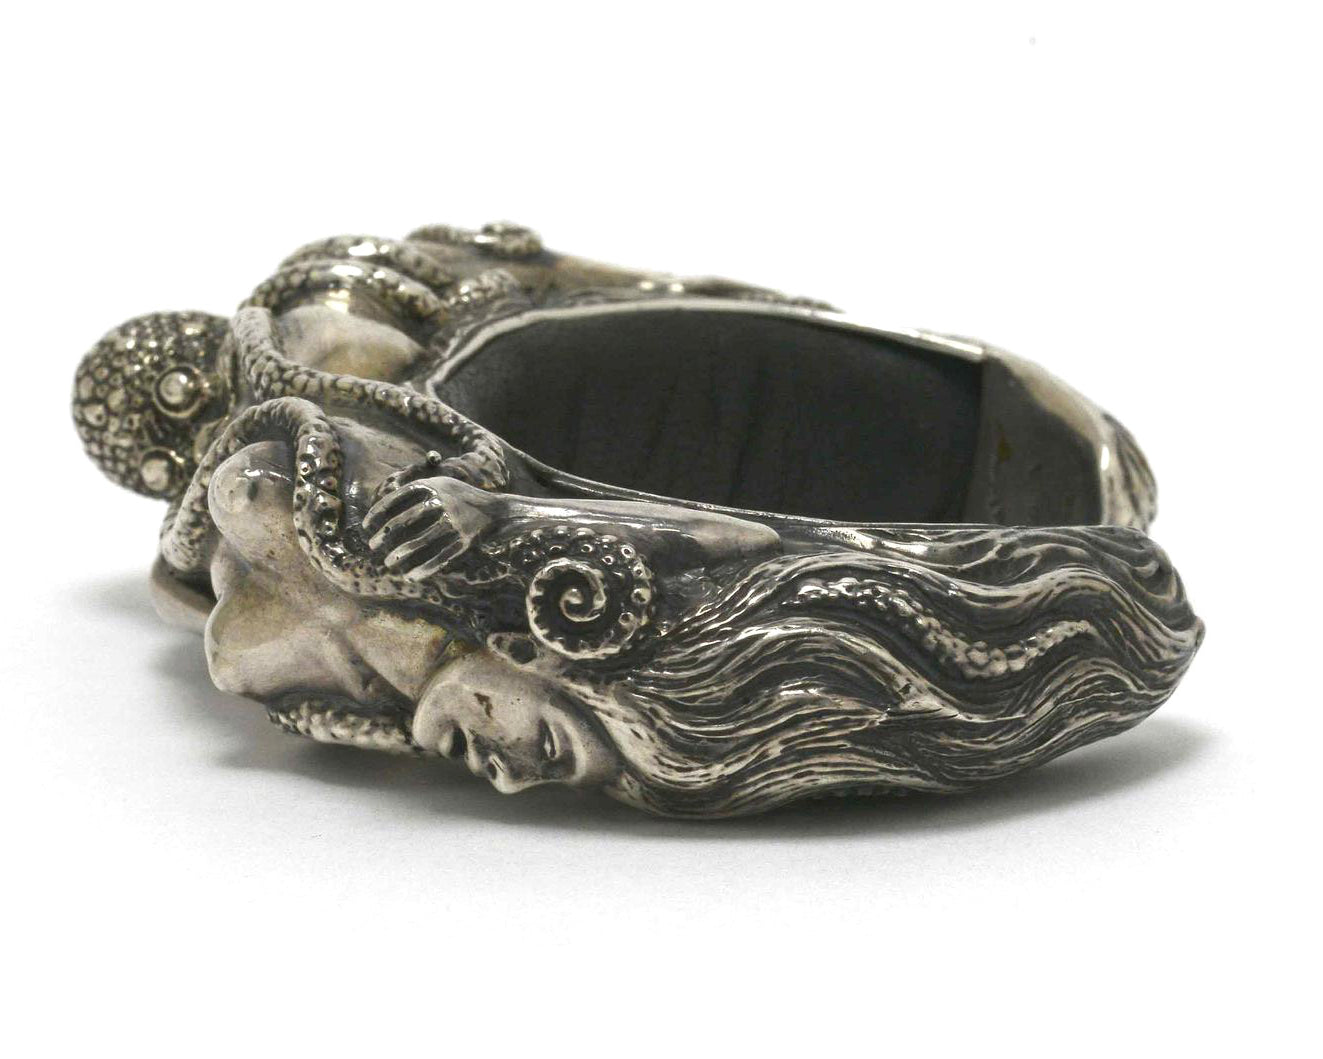 These are hand crafted silver and black leather cuffs by french artisan Lou. 